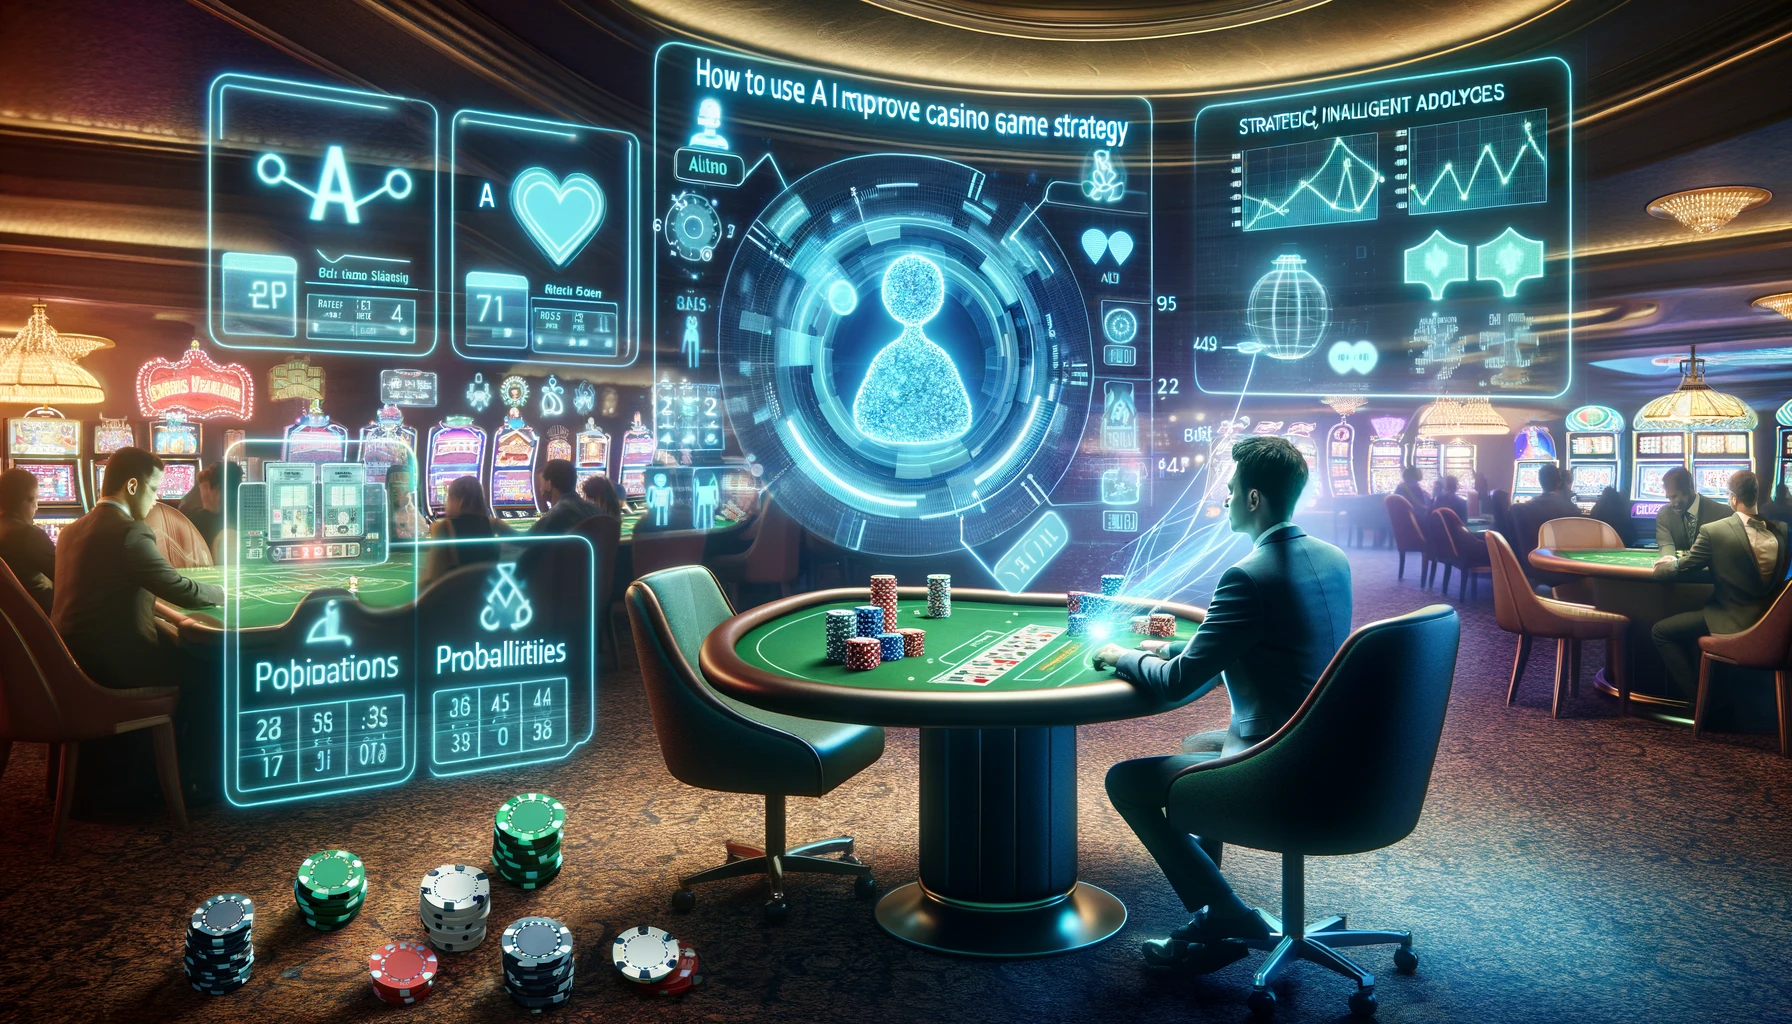 How to Use AI to Improve Your Casino Game Strategy